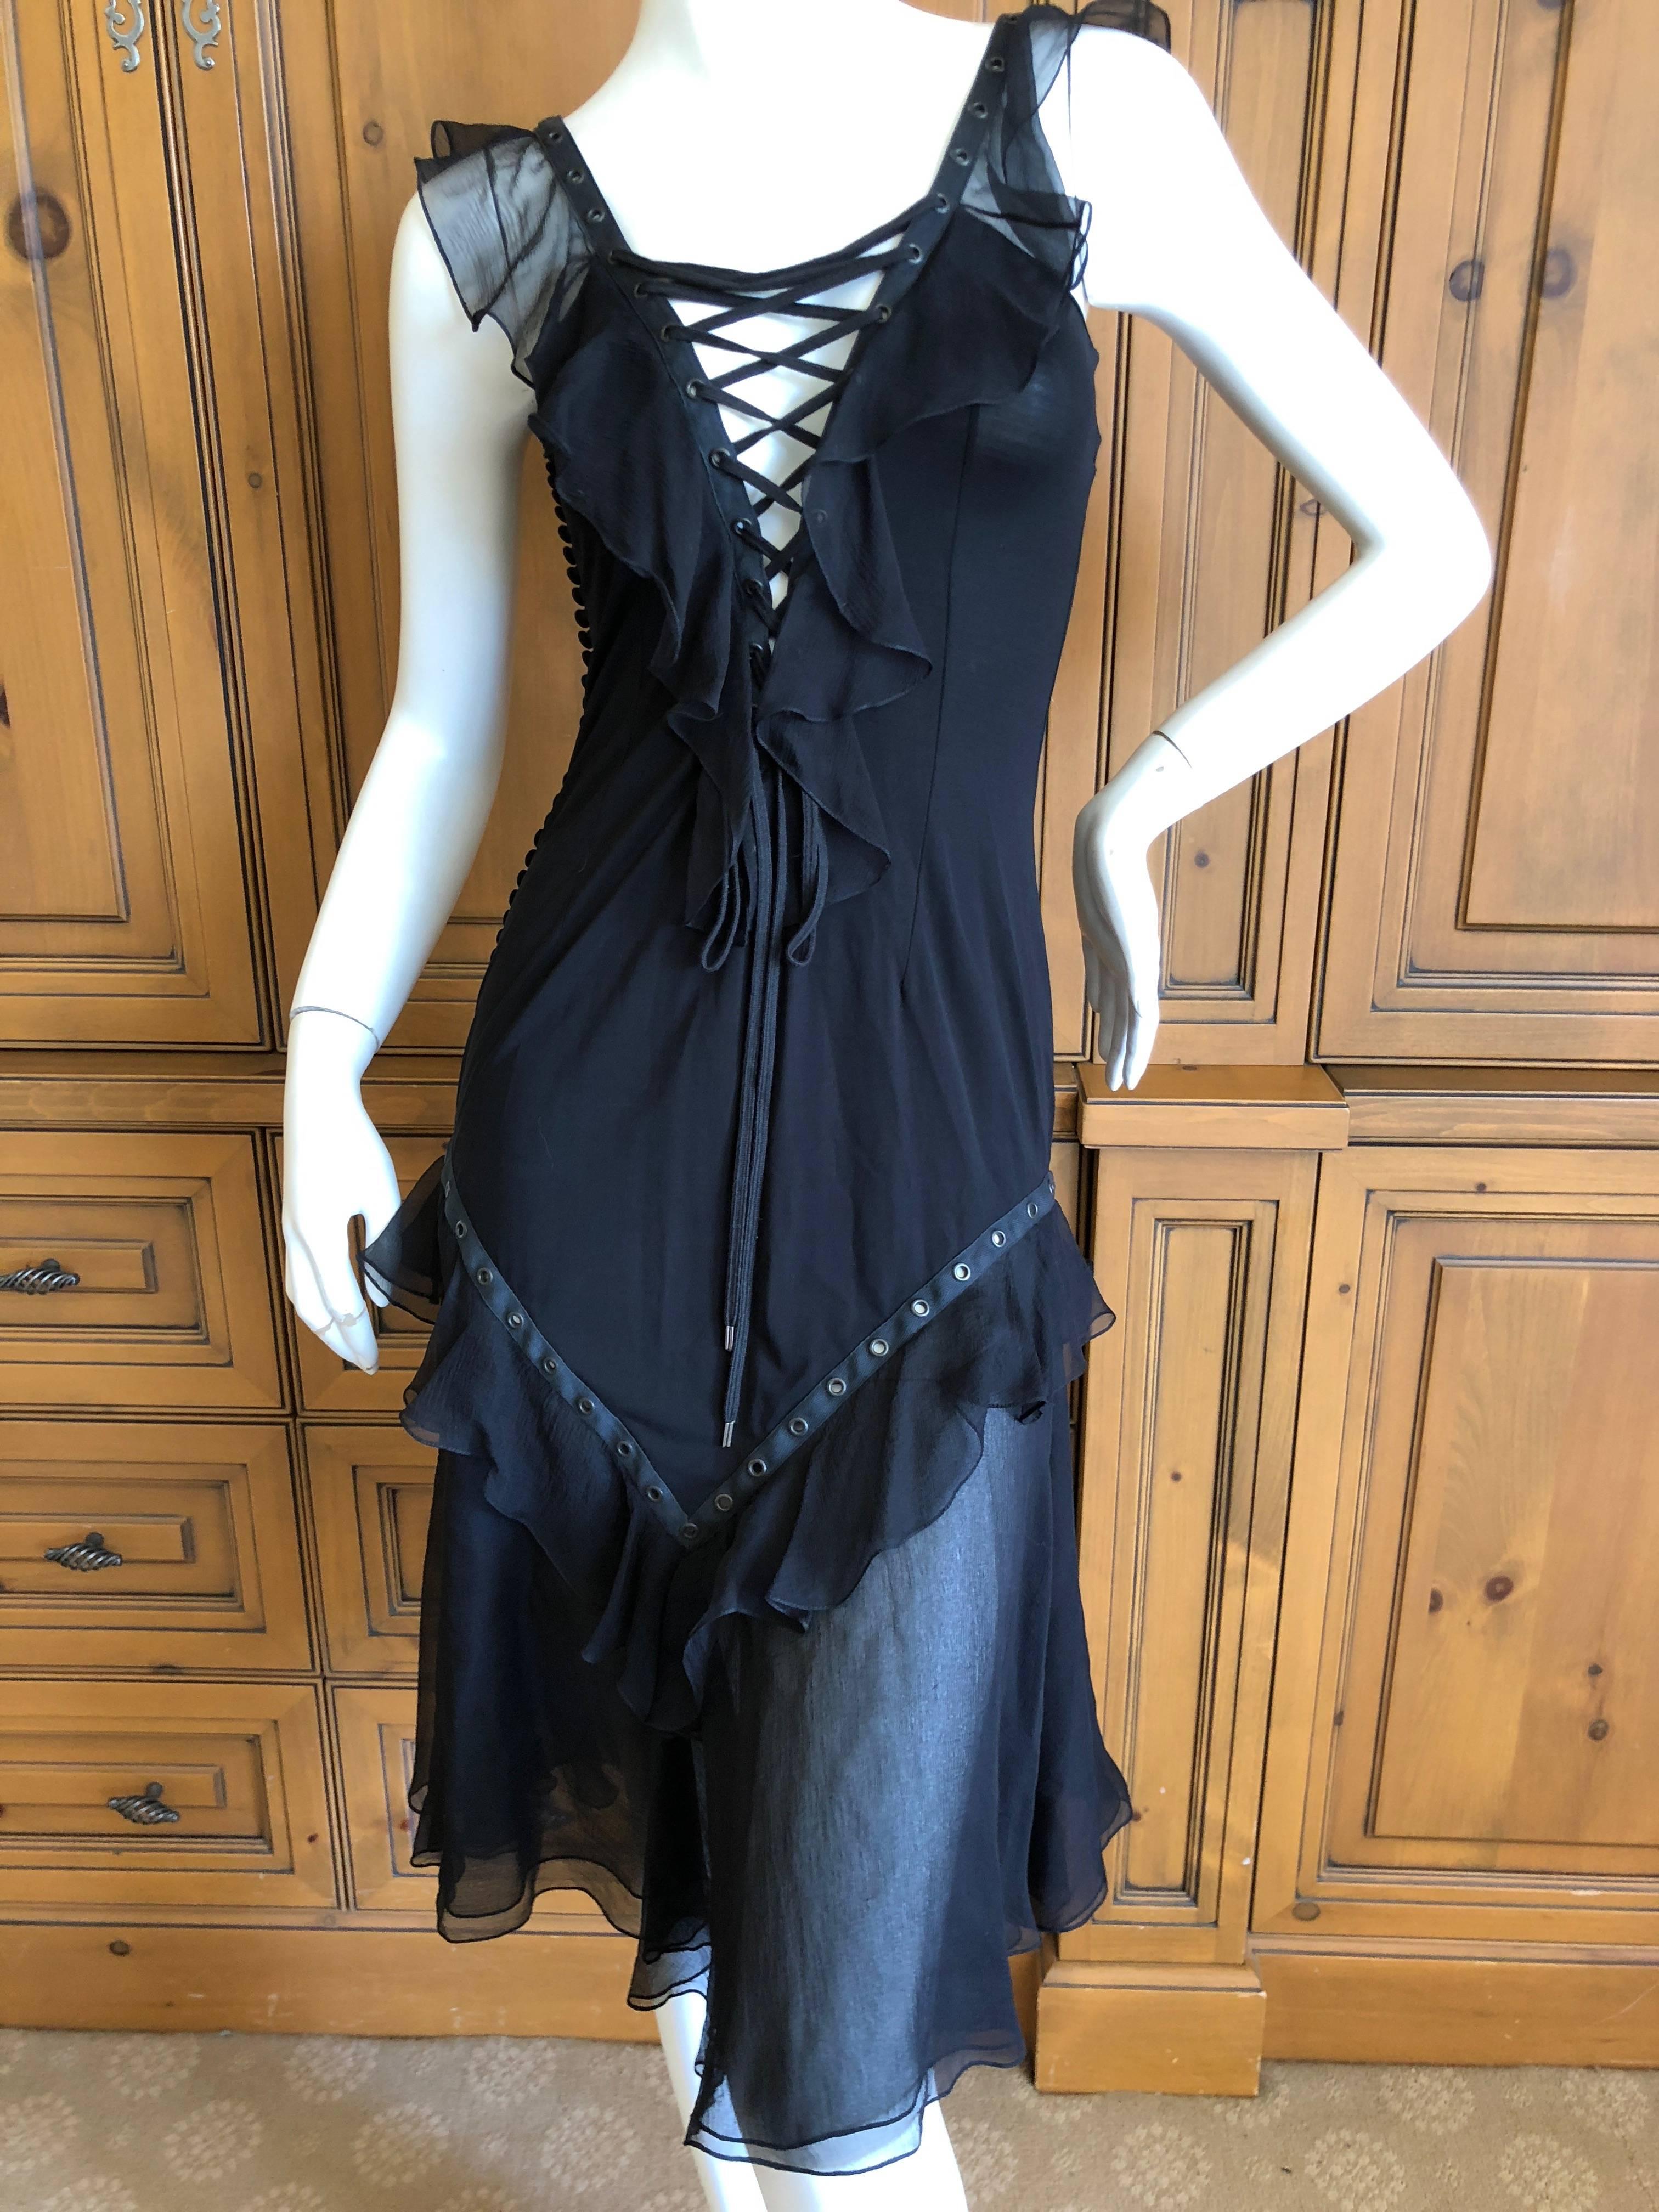 Christian Dior by John Galliano Black Silk Chiffon Corset Lace Ruffled Dress In Excellent Condition For Sale In Cloverdale, CA